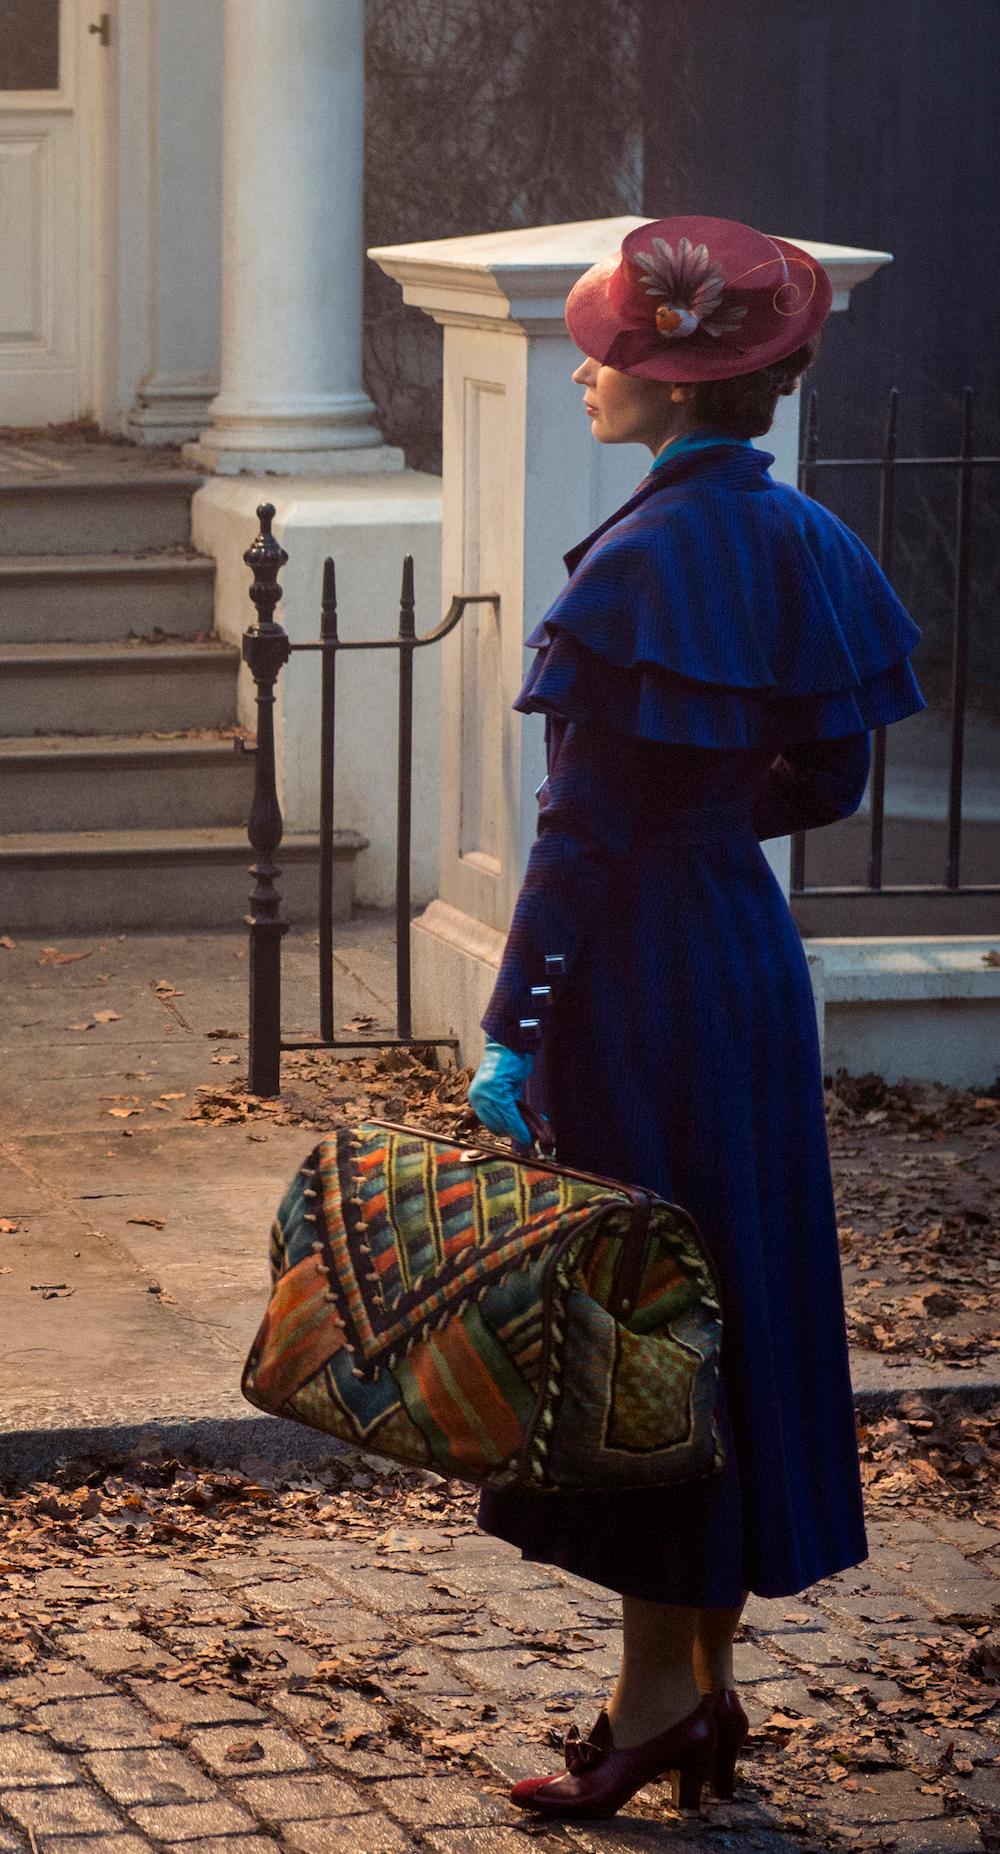 Mary Poppins (Emily Blunt) returns to the Banks home after many years and uses her magical skills to help the now-grown Michael and Jane rediscover the joy and wonder missing in their lives, in Disney's musical “Mary Poppins Returns,” directed by Rob Marshall. (Disney)